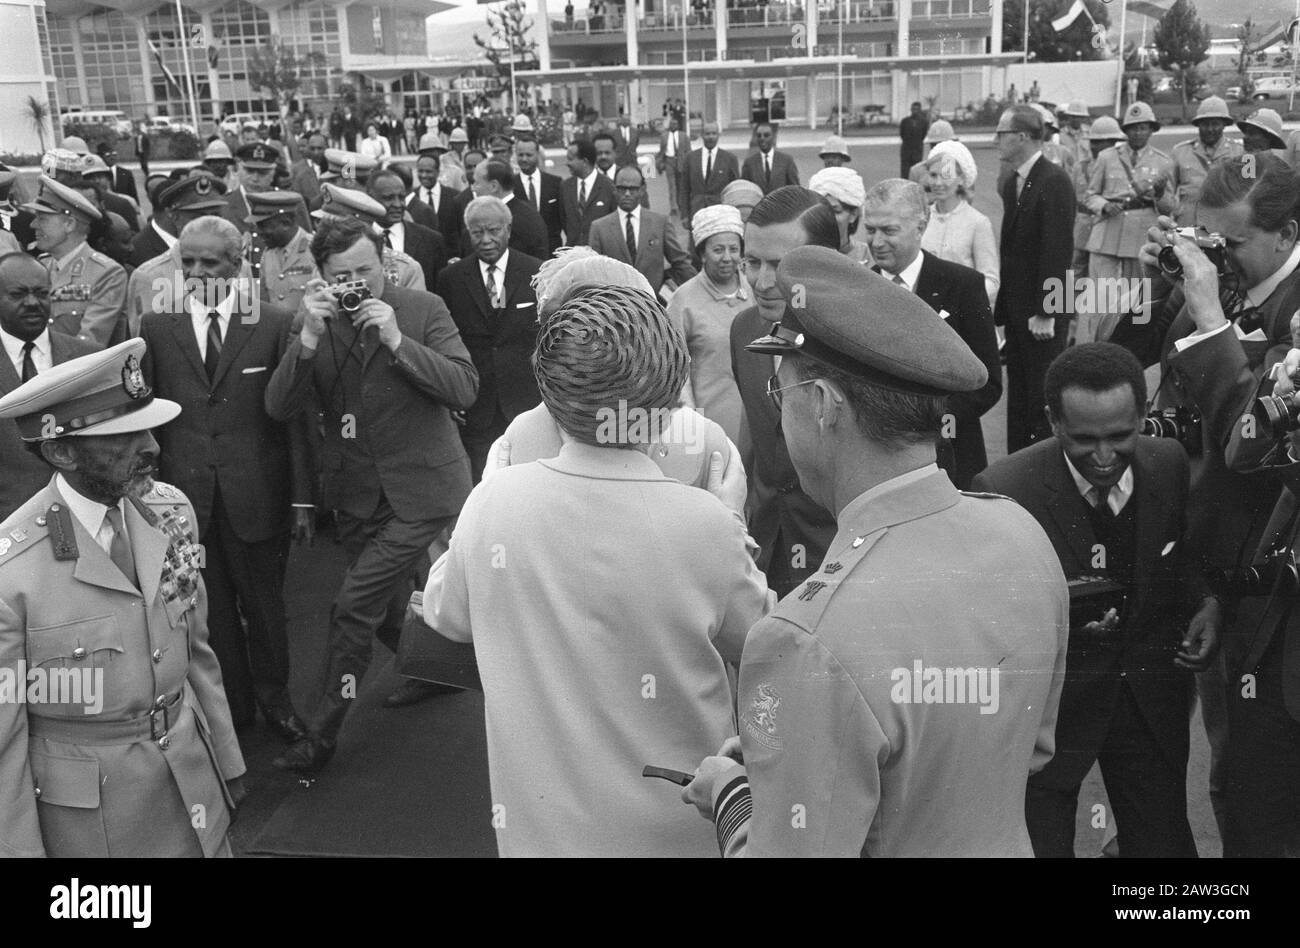 State Visit royal family to Ethiopia  Princess Beatrix and Prince Claus goodbye at the airport in Addis Ababa royal couple and Emperor Haile Selassie (they leave for Tanzania) Date: February 2, 1969 Location: Addis Ababa, Ethiopia Keywords: fAREWELL, emperors, leave airports Person Name: Beatrix, princess, Claus, prince, Haile Selassie, emperor of Ethiopia Stock Photo